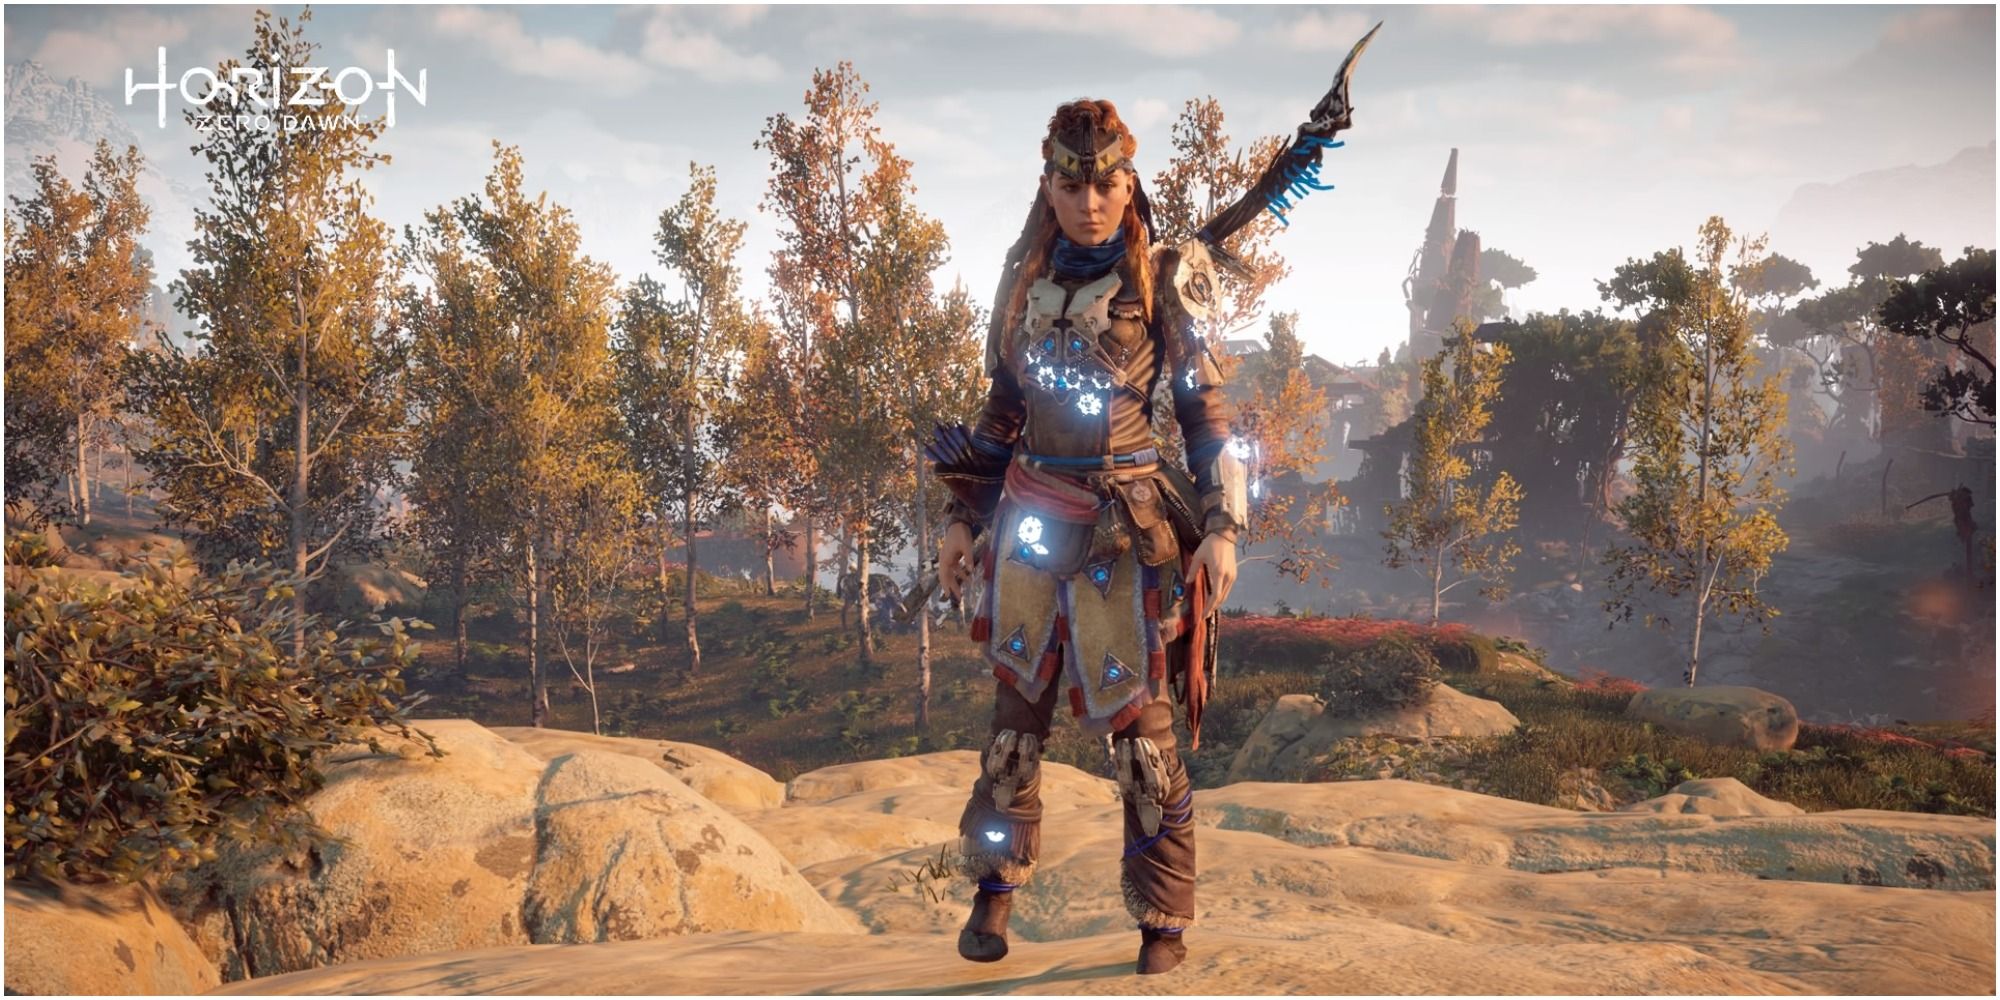 Aloy standing on rocks in armor with trees behind her